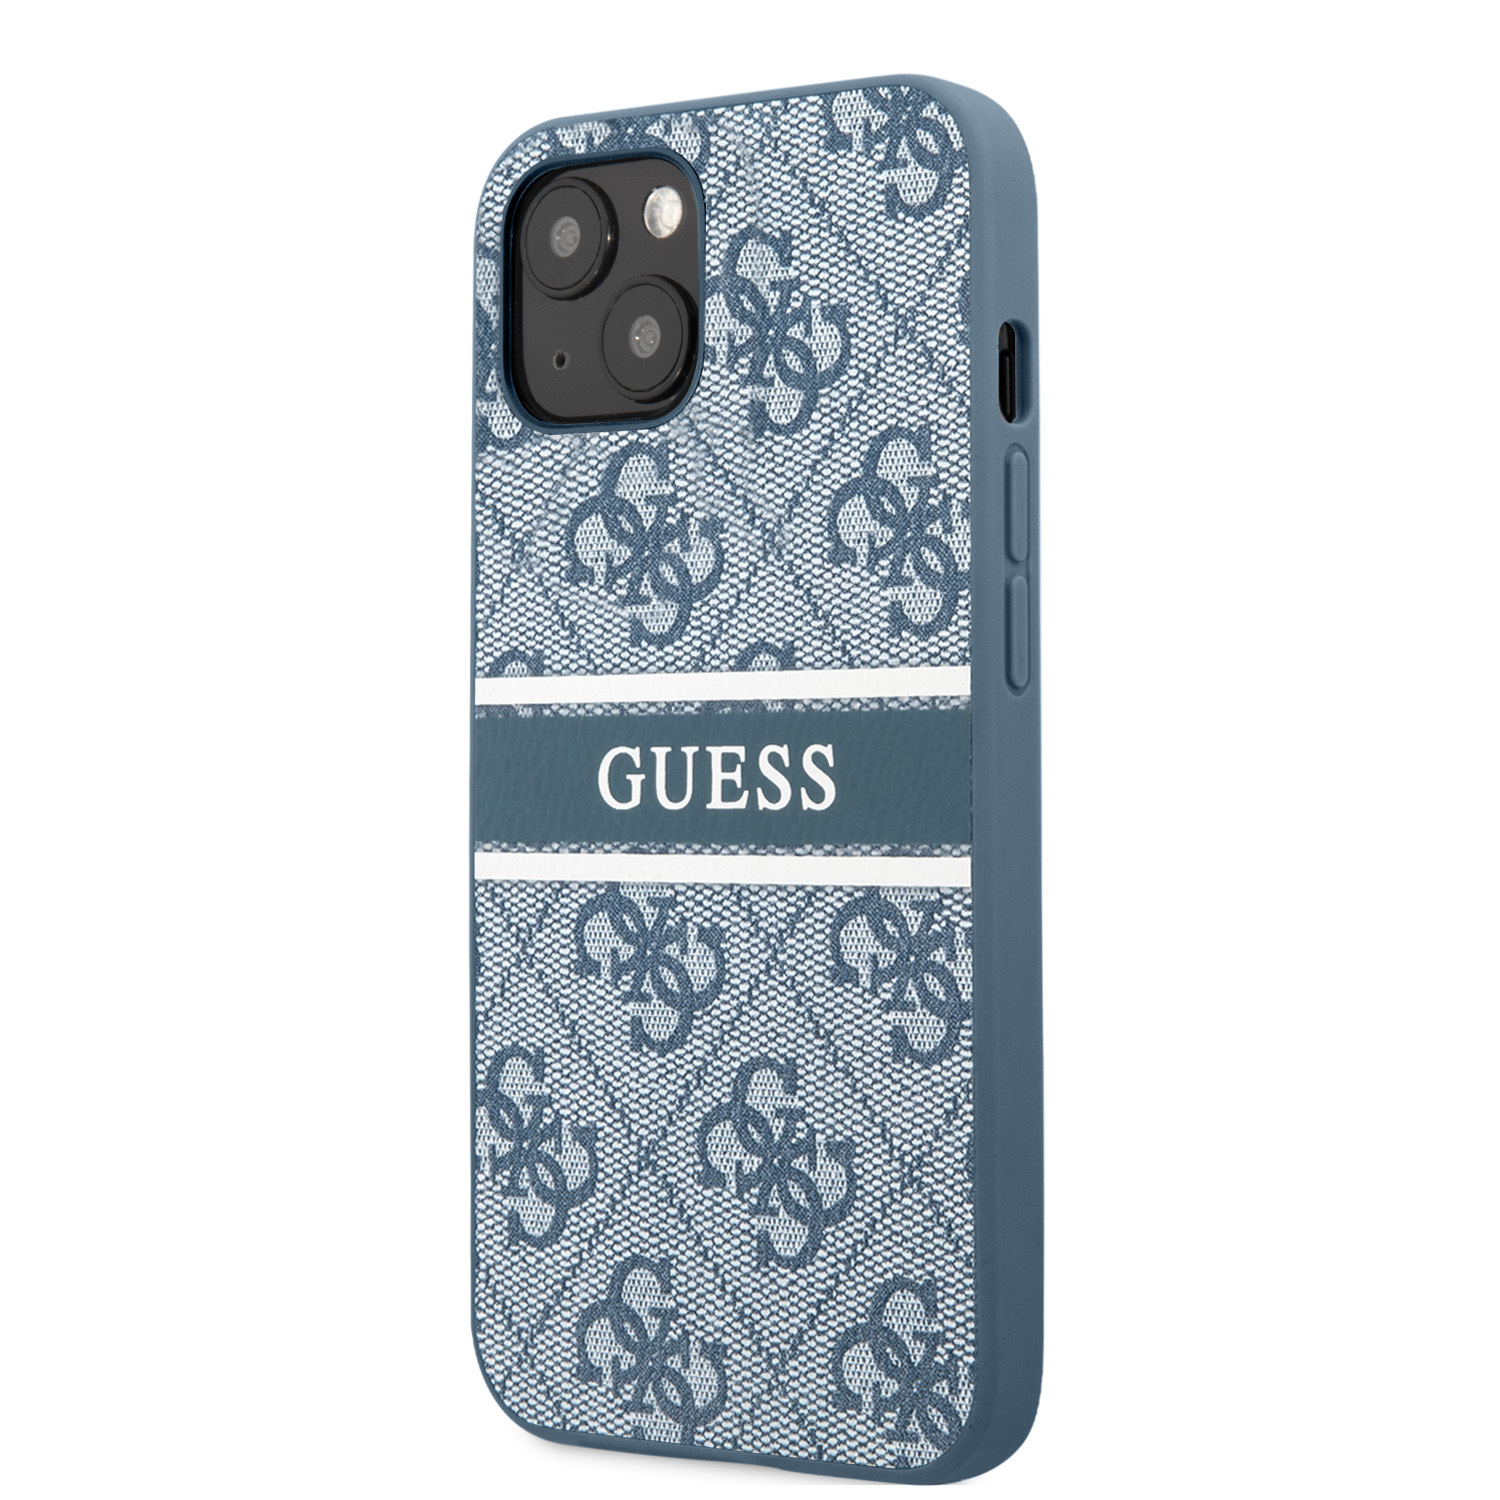 Guess iphone 15. Чехол guess для iphone 13 Pro. Чехол guess 13 Pro Max. Чехол на айфон 13 про Макс guess. Iphone 13 Pro Max guess Case.